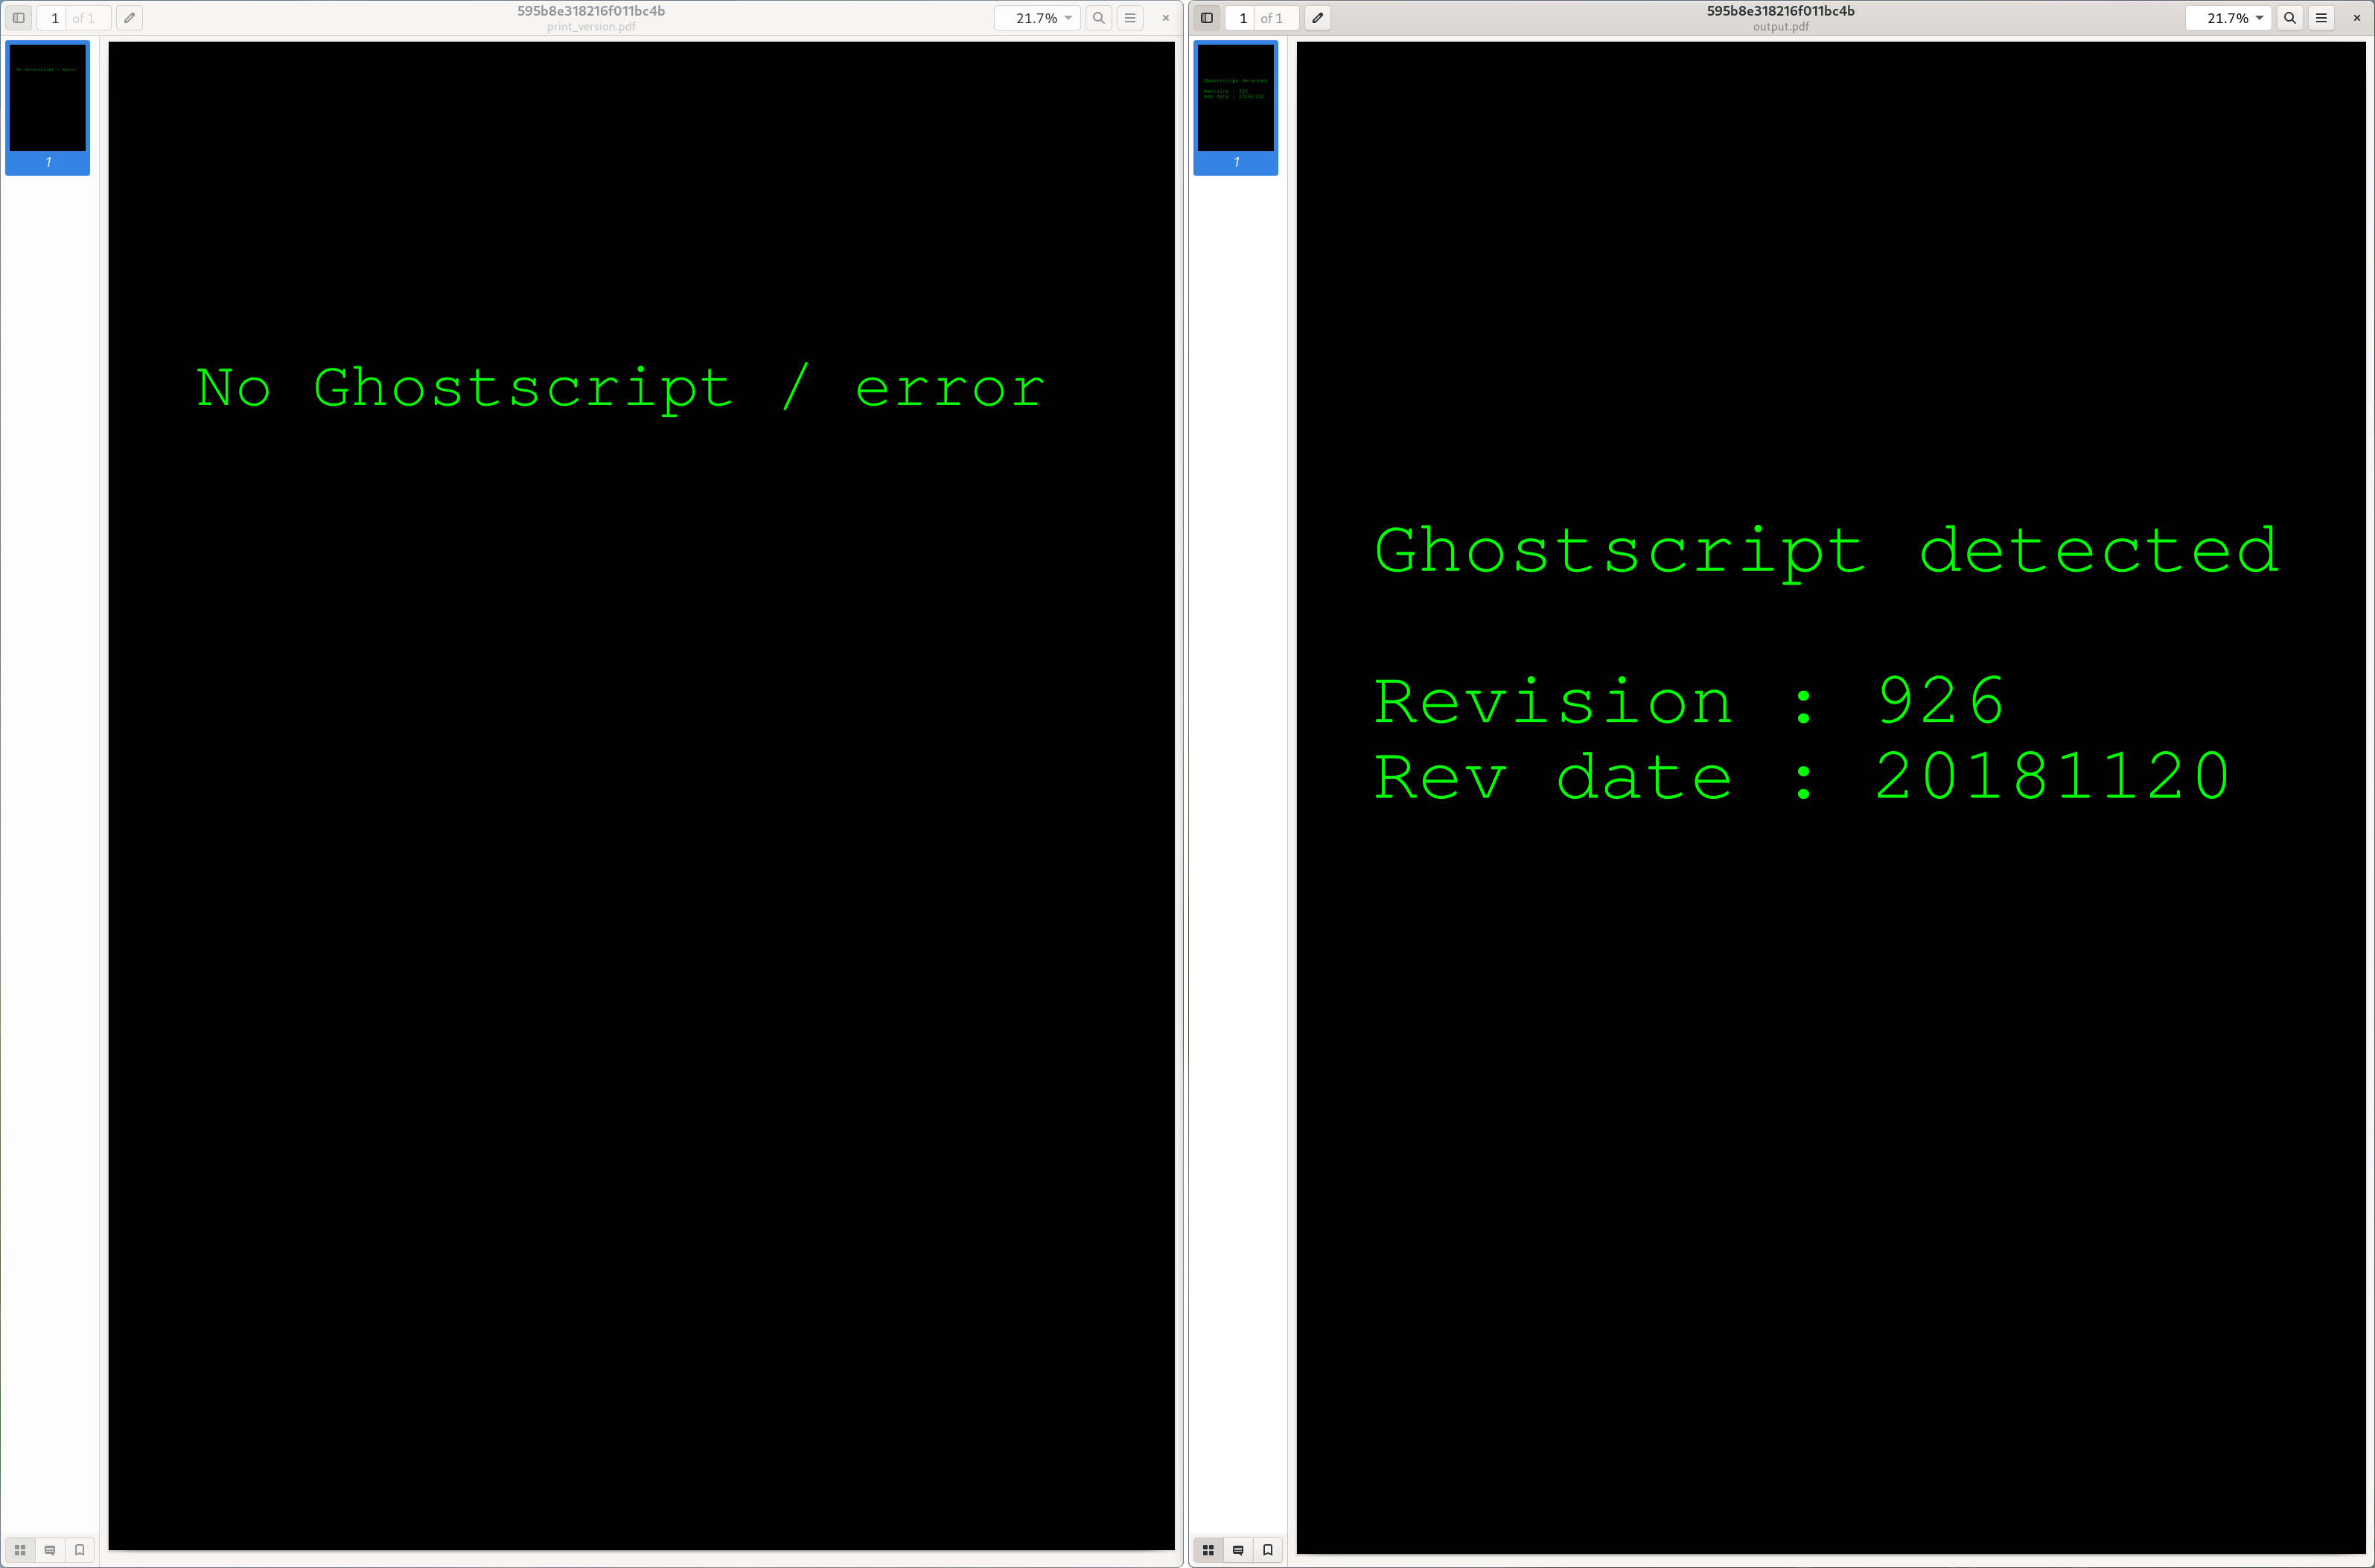 Screenshot of two documents opened side-by-side in Evince, left one showing the text 'No Ghostscript / error', right one showing 'Ghostscript detected, Revision: 926, Rev date: 20181120'